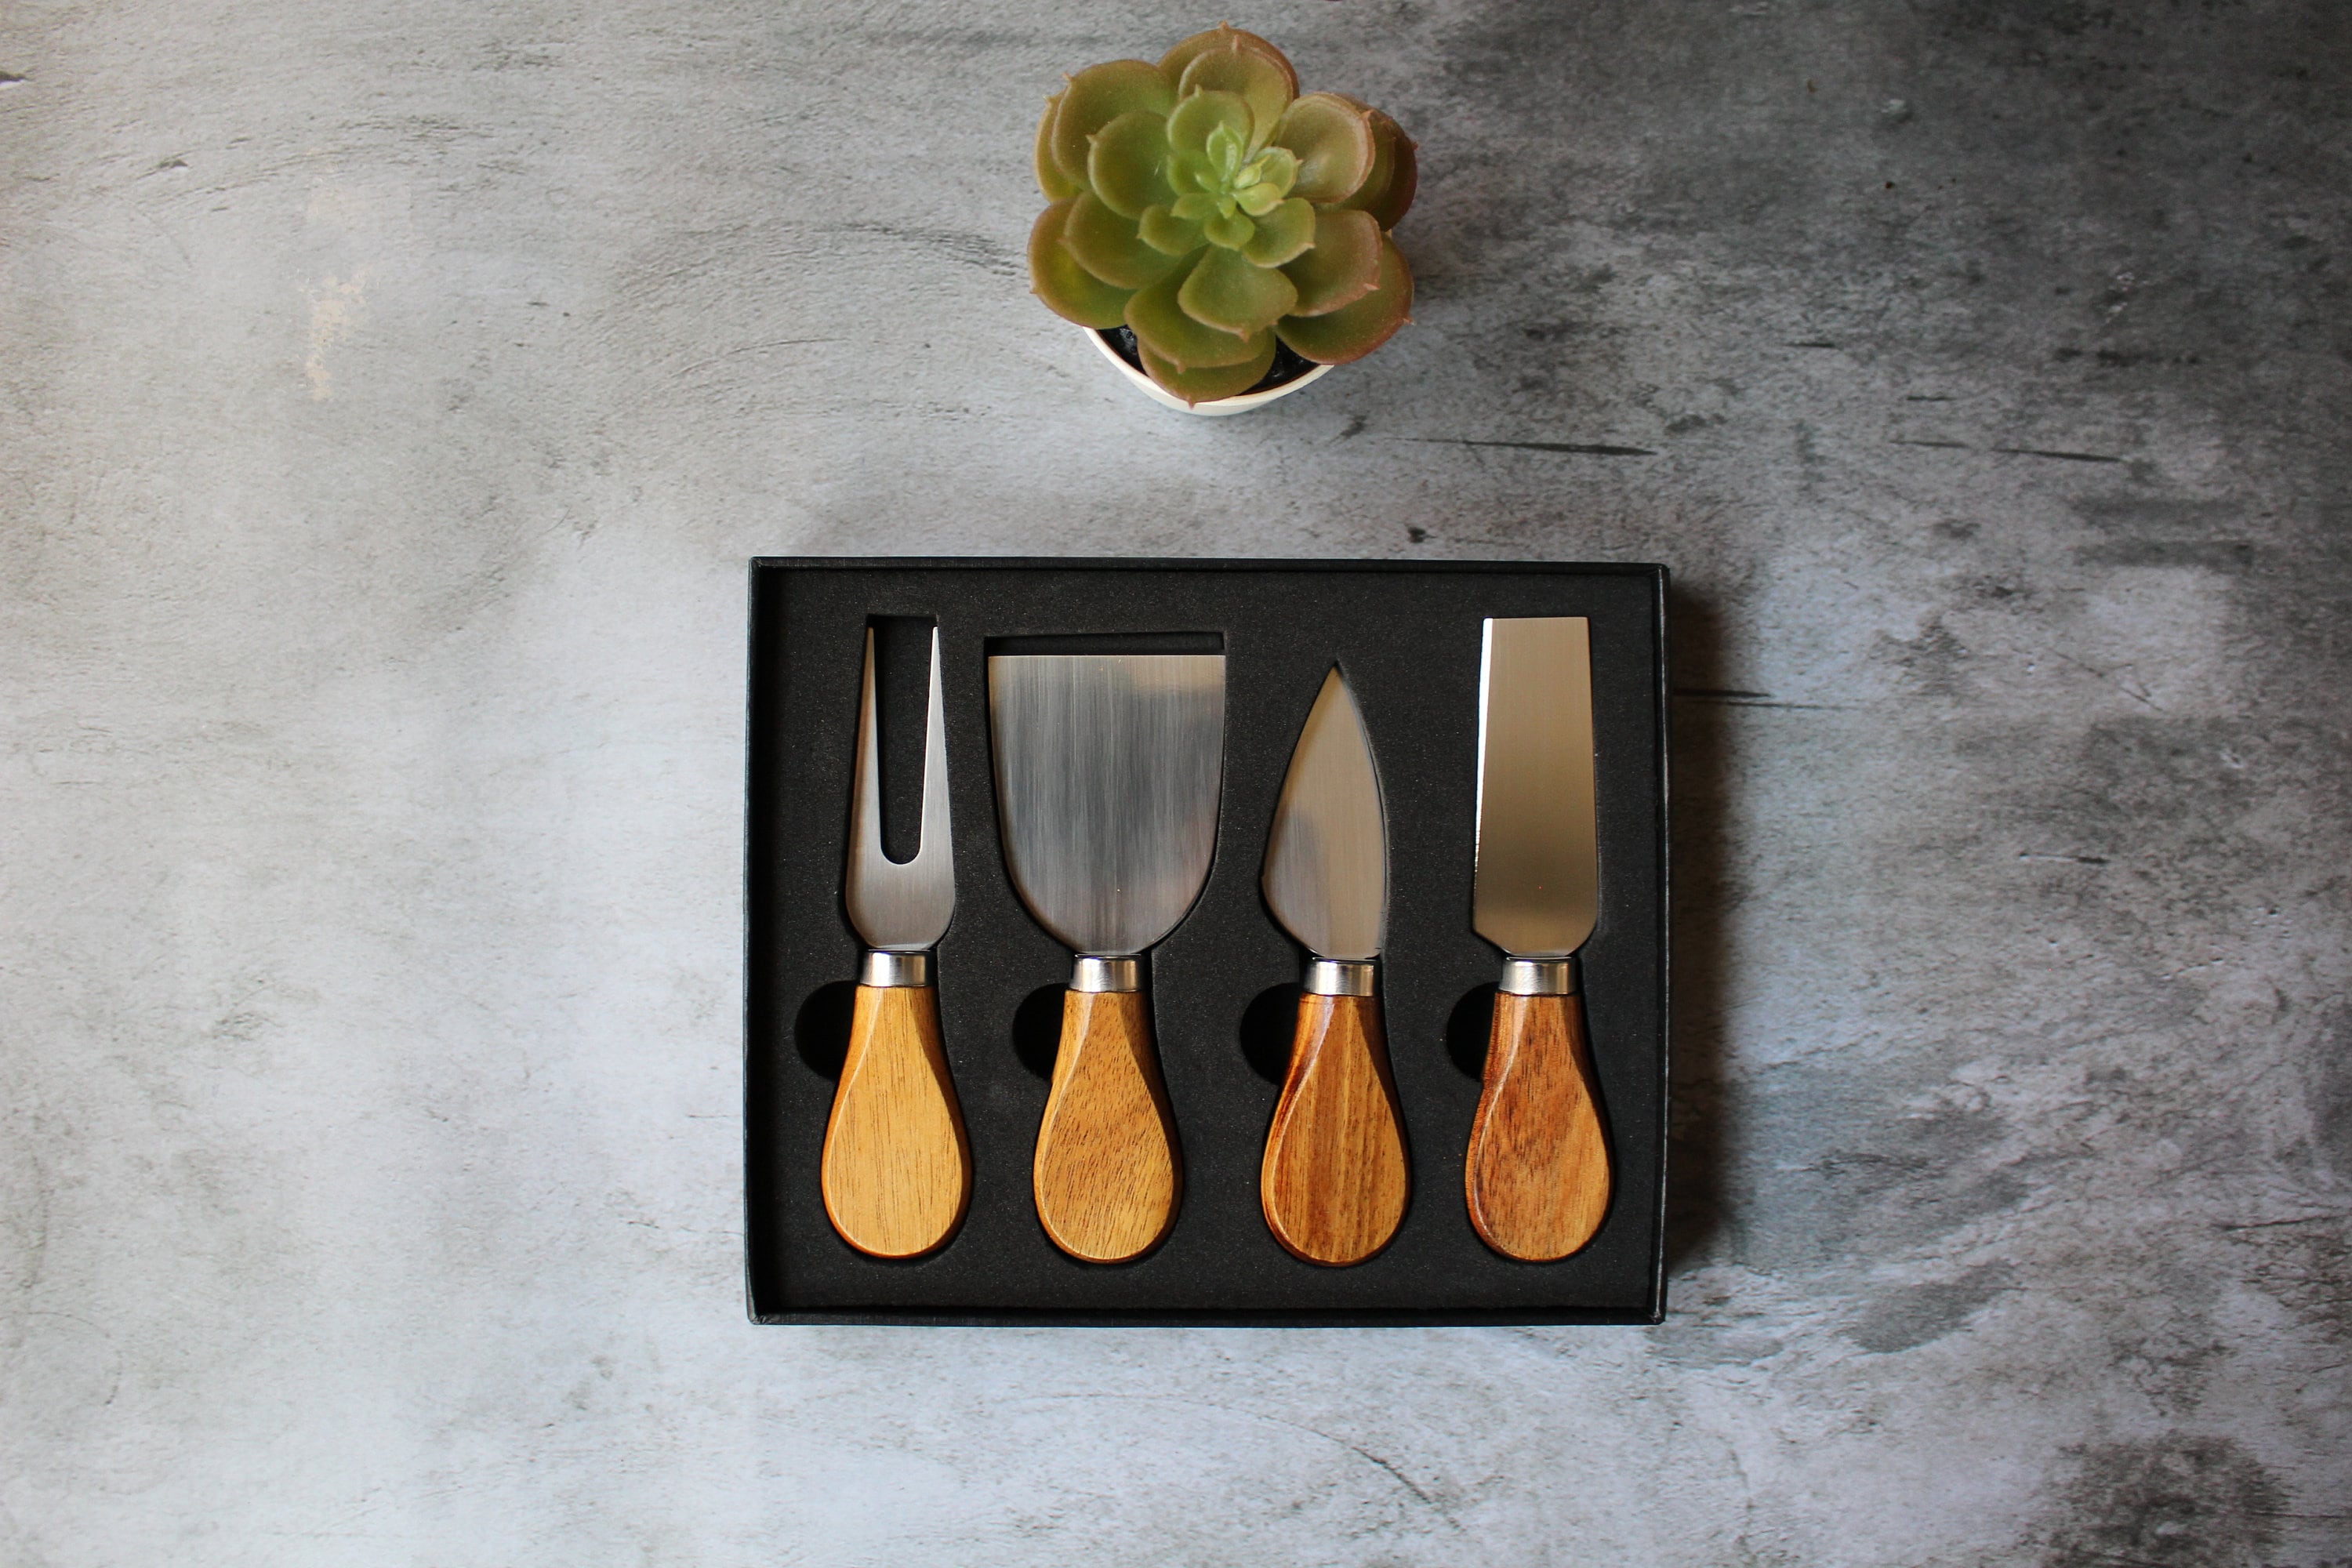 Cheese knife set “Lattevivo” in stainless steel and wood – LEGNOART